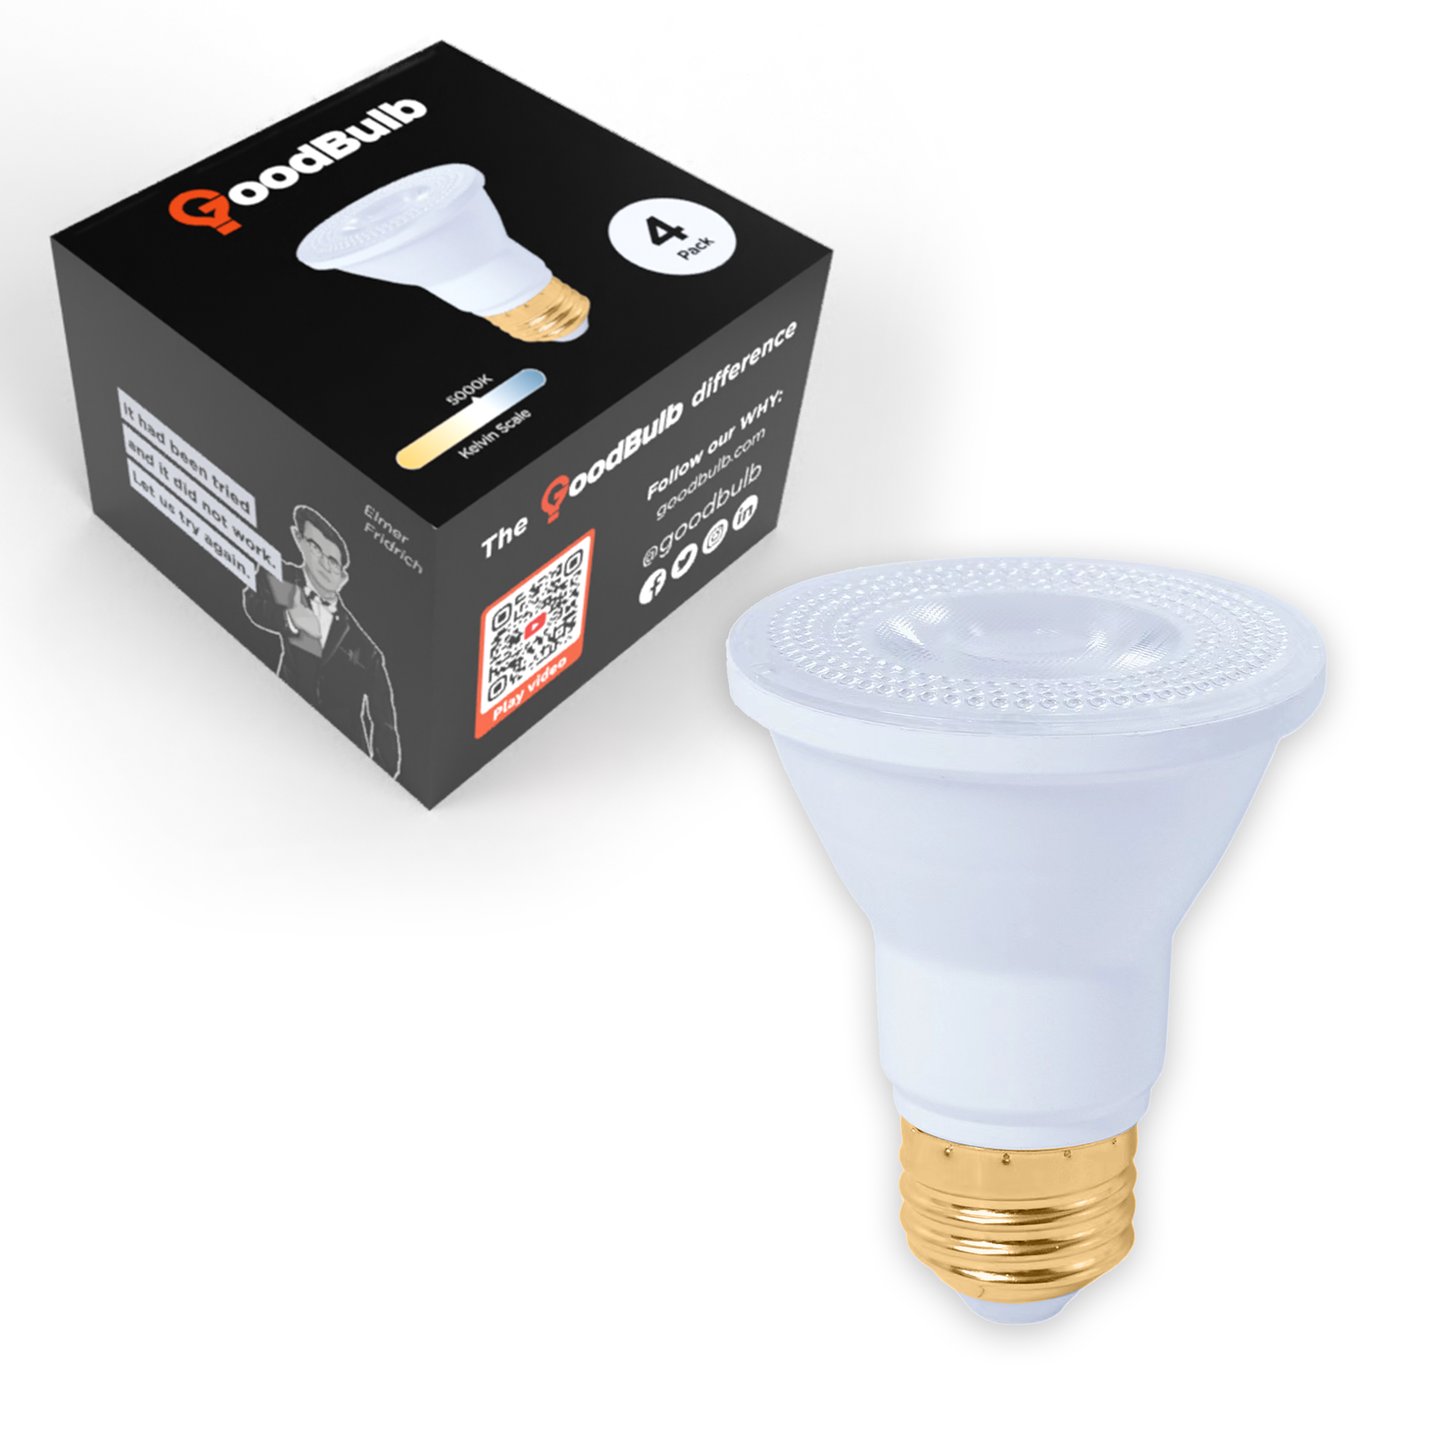 PAR20 LED light bulb with box. Illuminating a warm, comfortable spectrum of light. Can last 25,000 Hours and is dimmable.